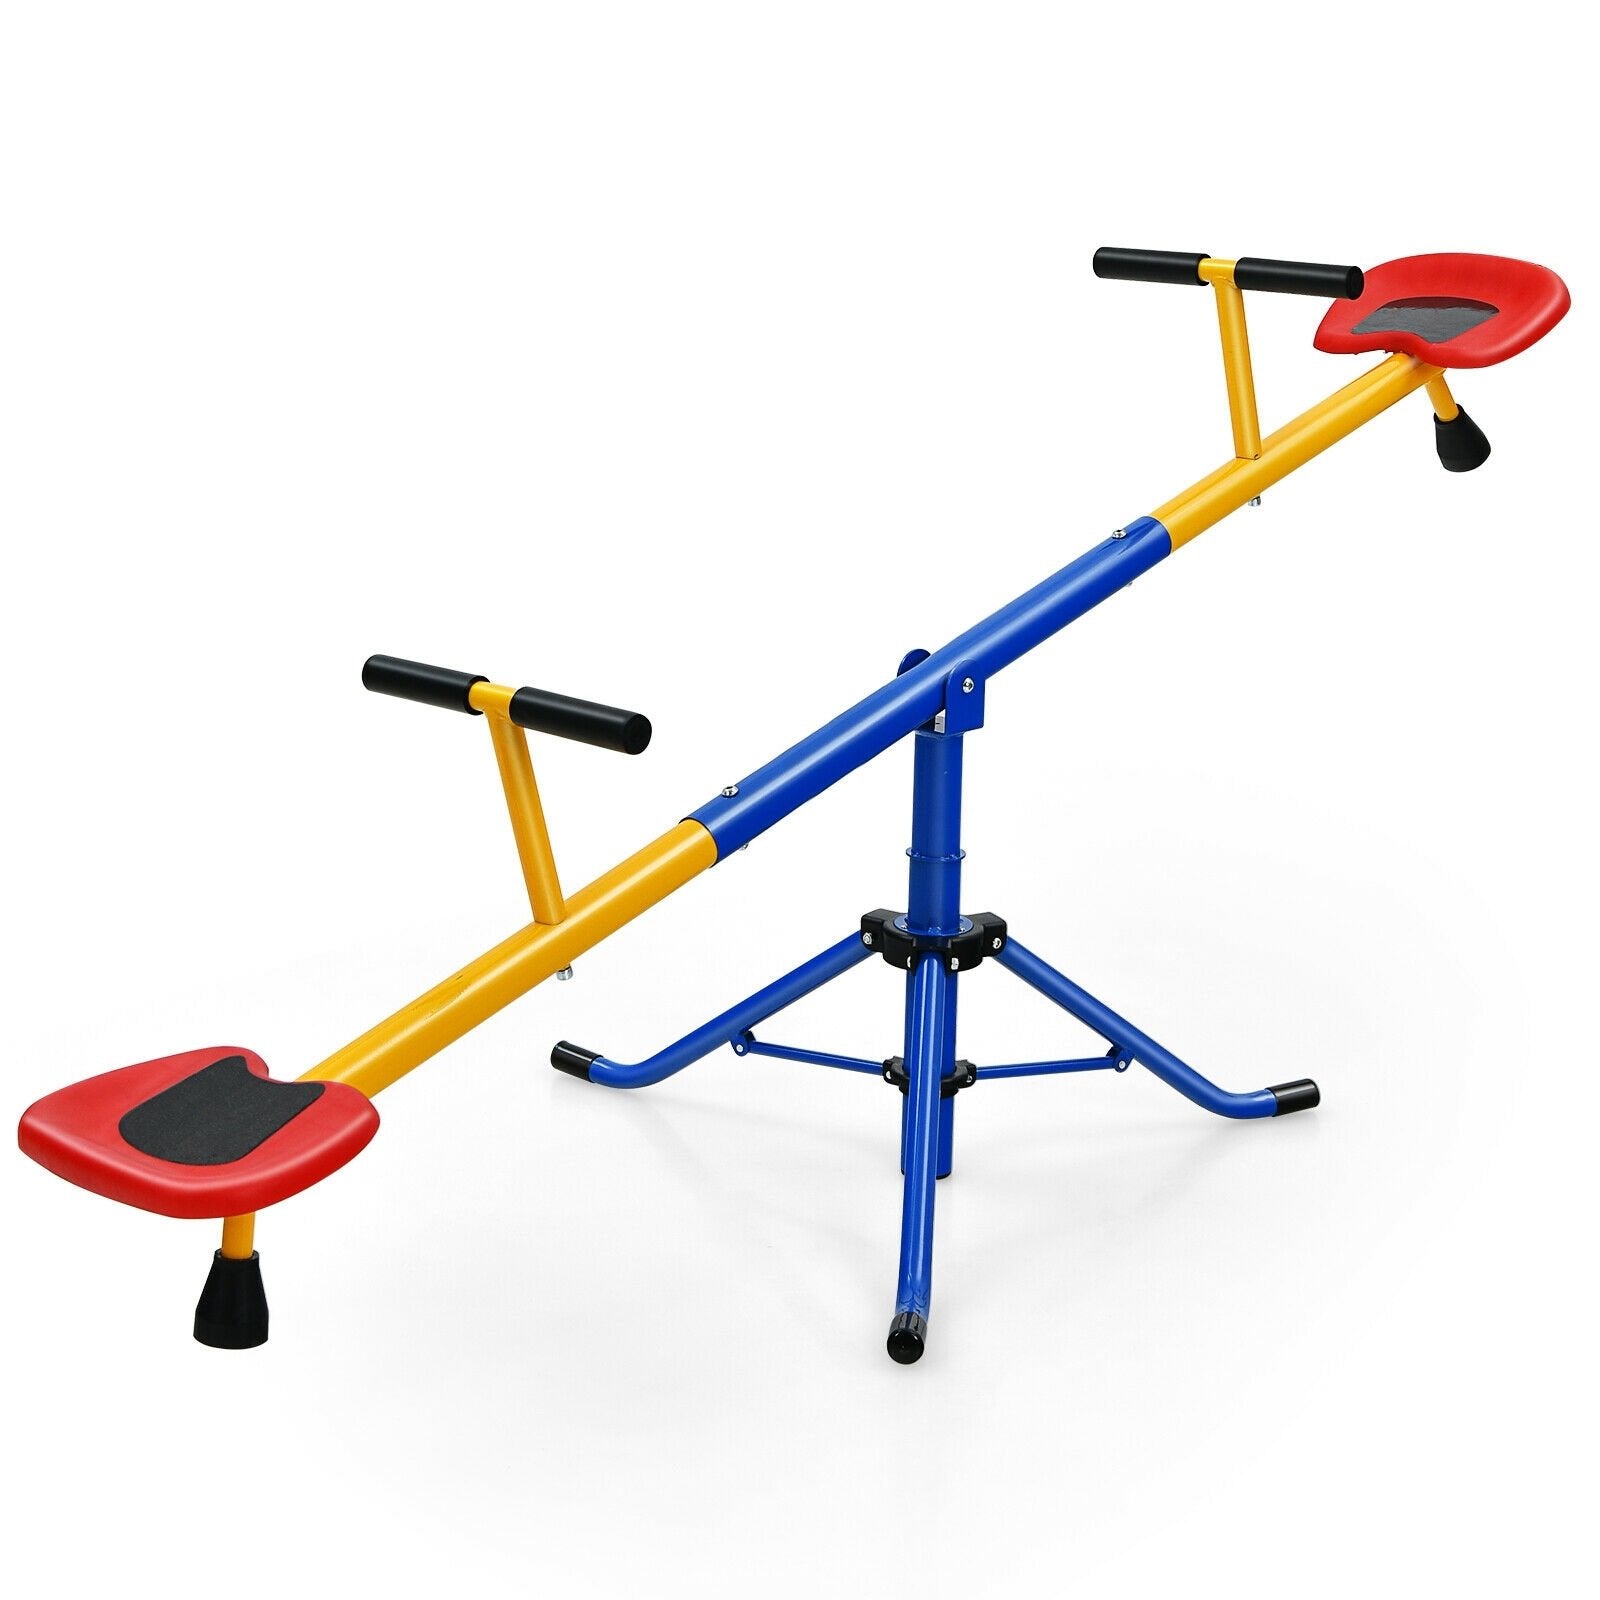 360°Rotation Kids Seesaw Swivel Teeter Totter Playground Equipment at Gallery Canada